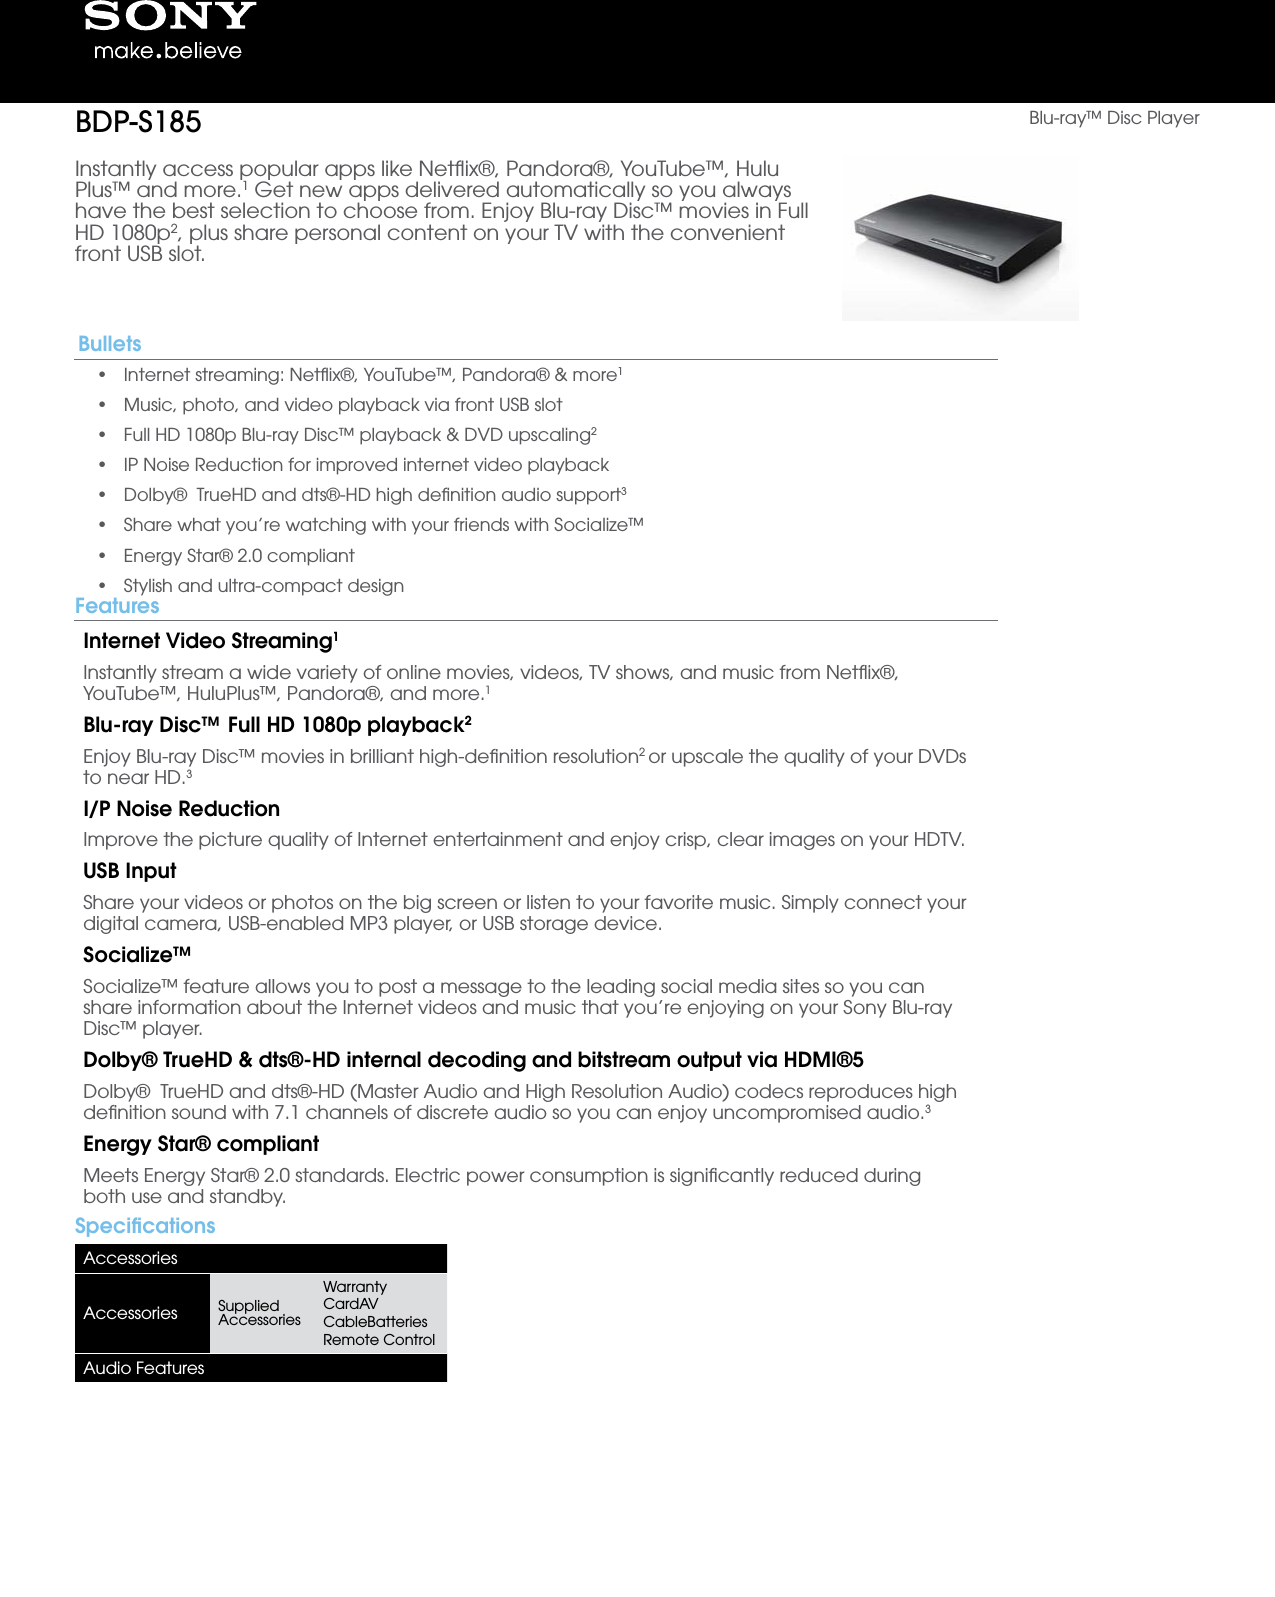 Page 1 of 3 - Sony BDP-S185 User Manual Marketing Specifications BDPS185 Mksp